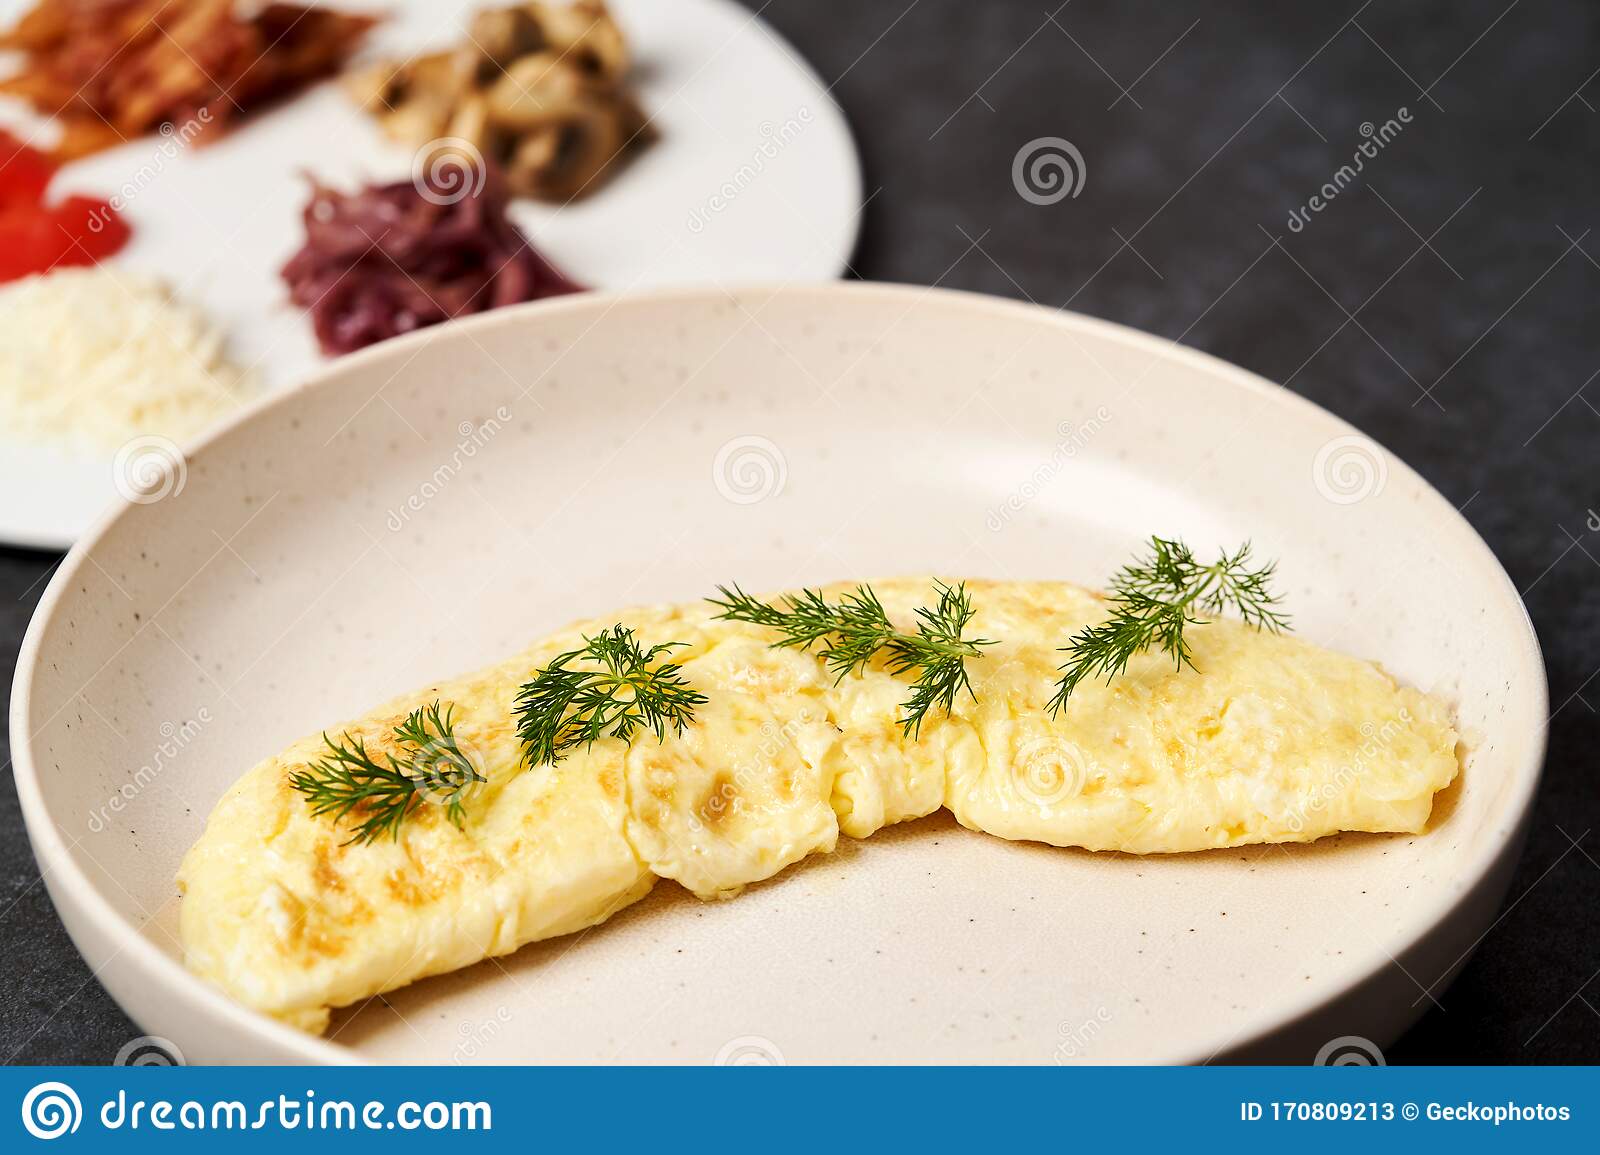 omelette with bacon and mushrooms